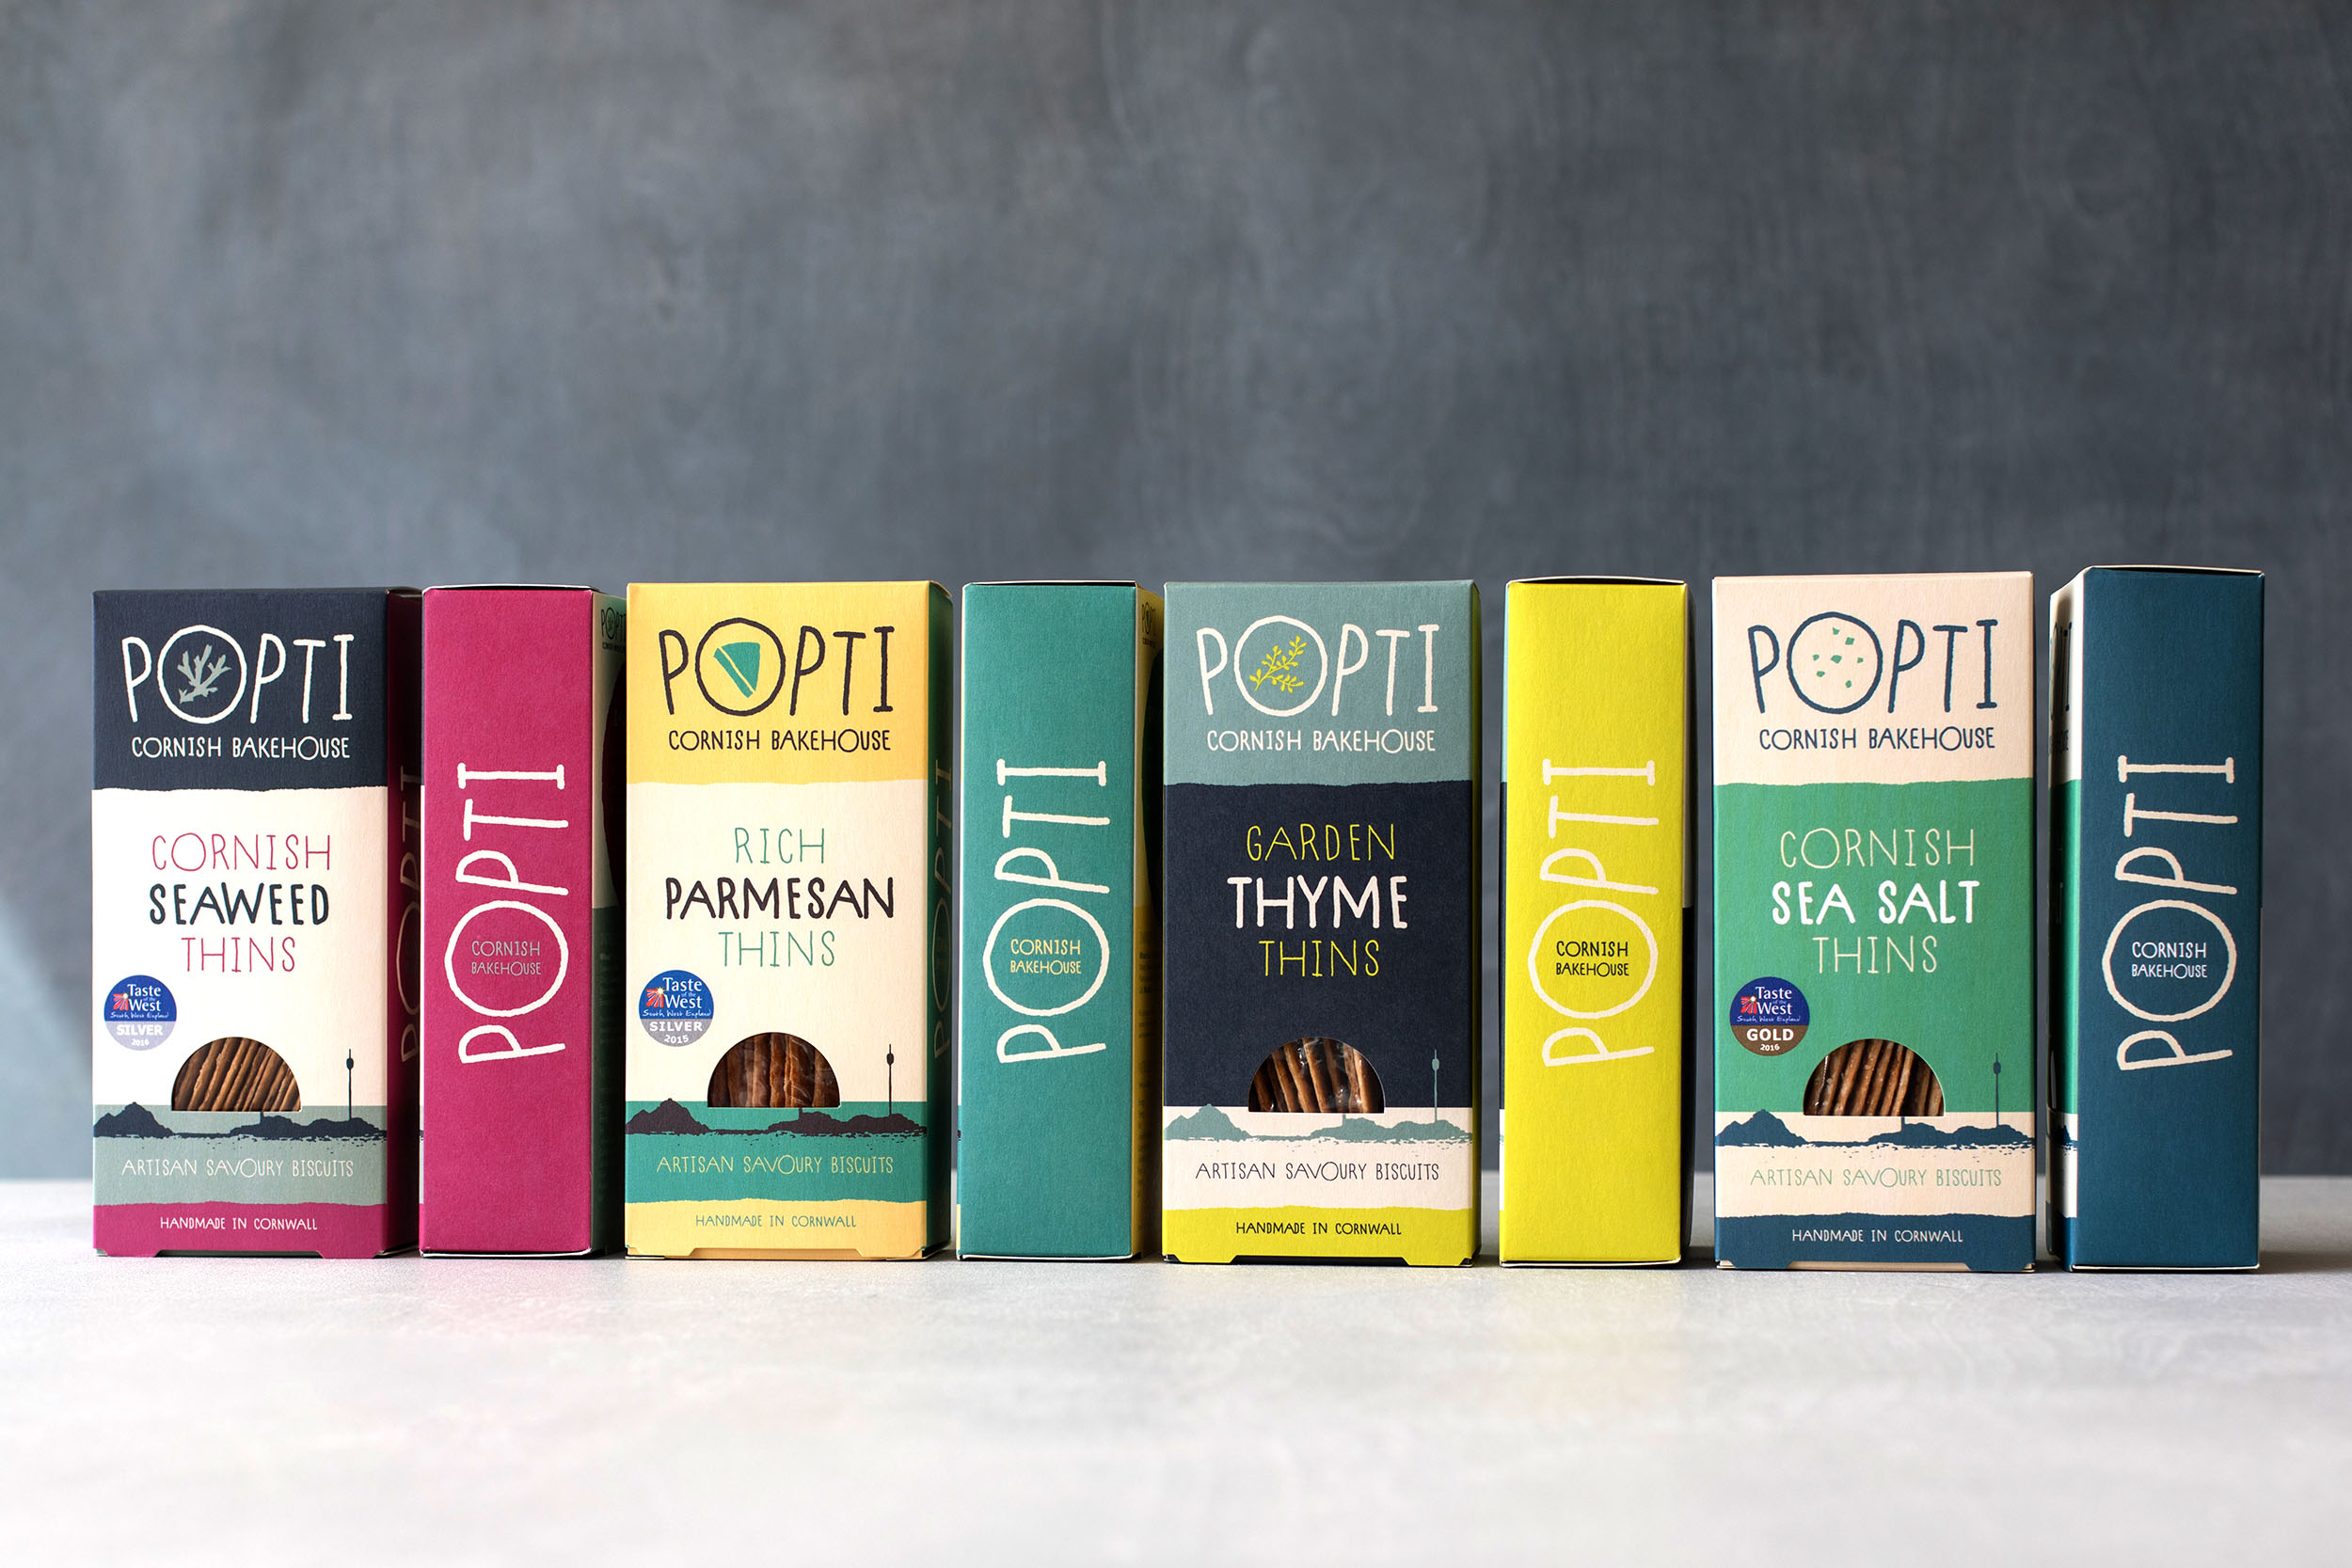 Savoury biscuits created by Popti Cornish Bakehouse